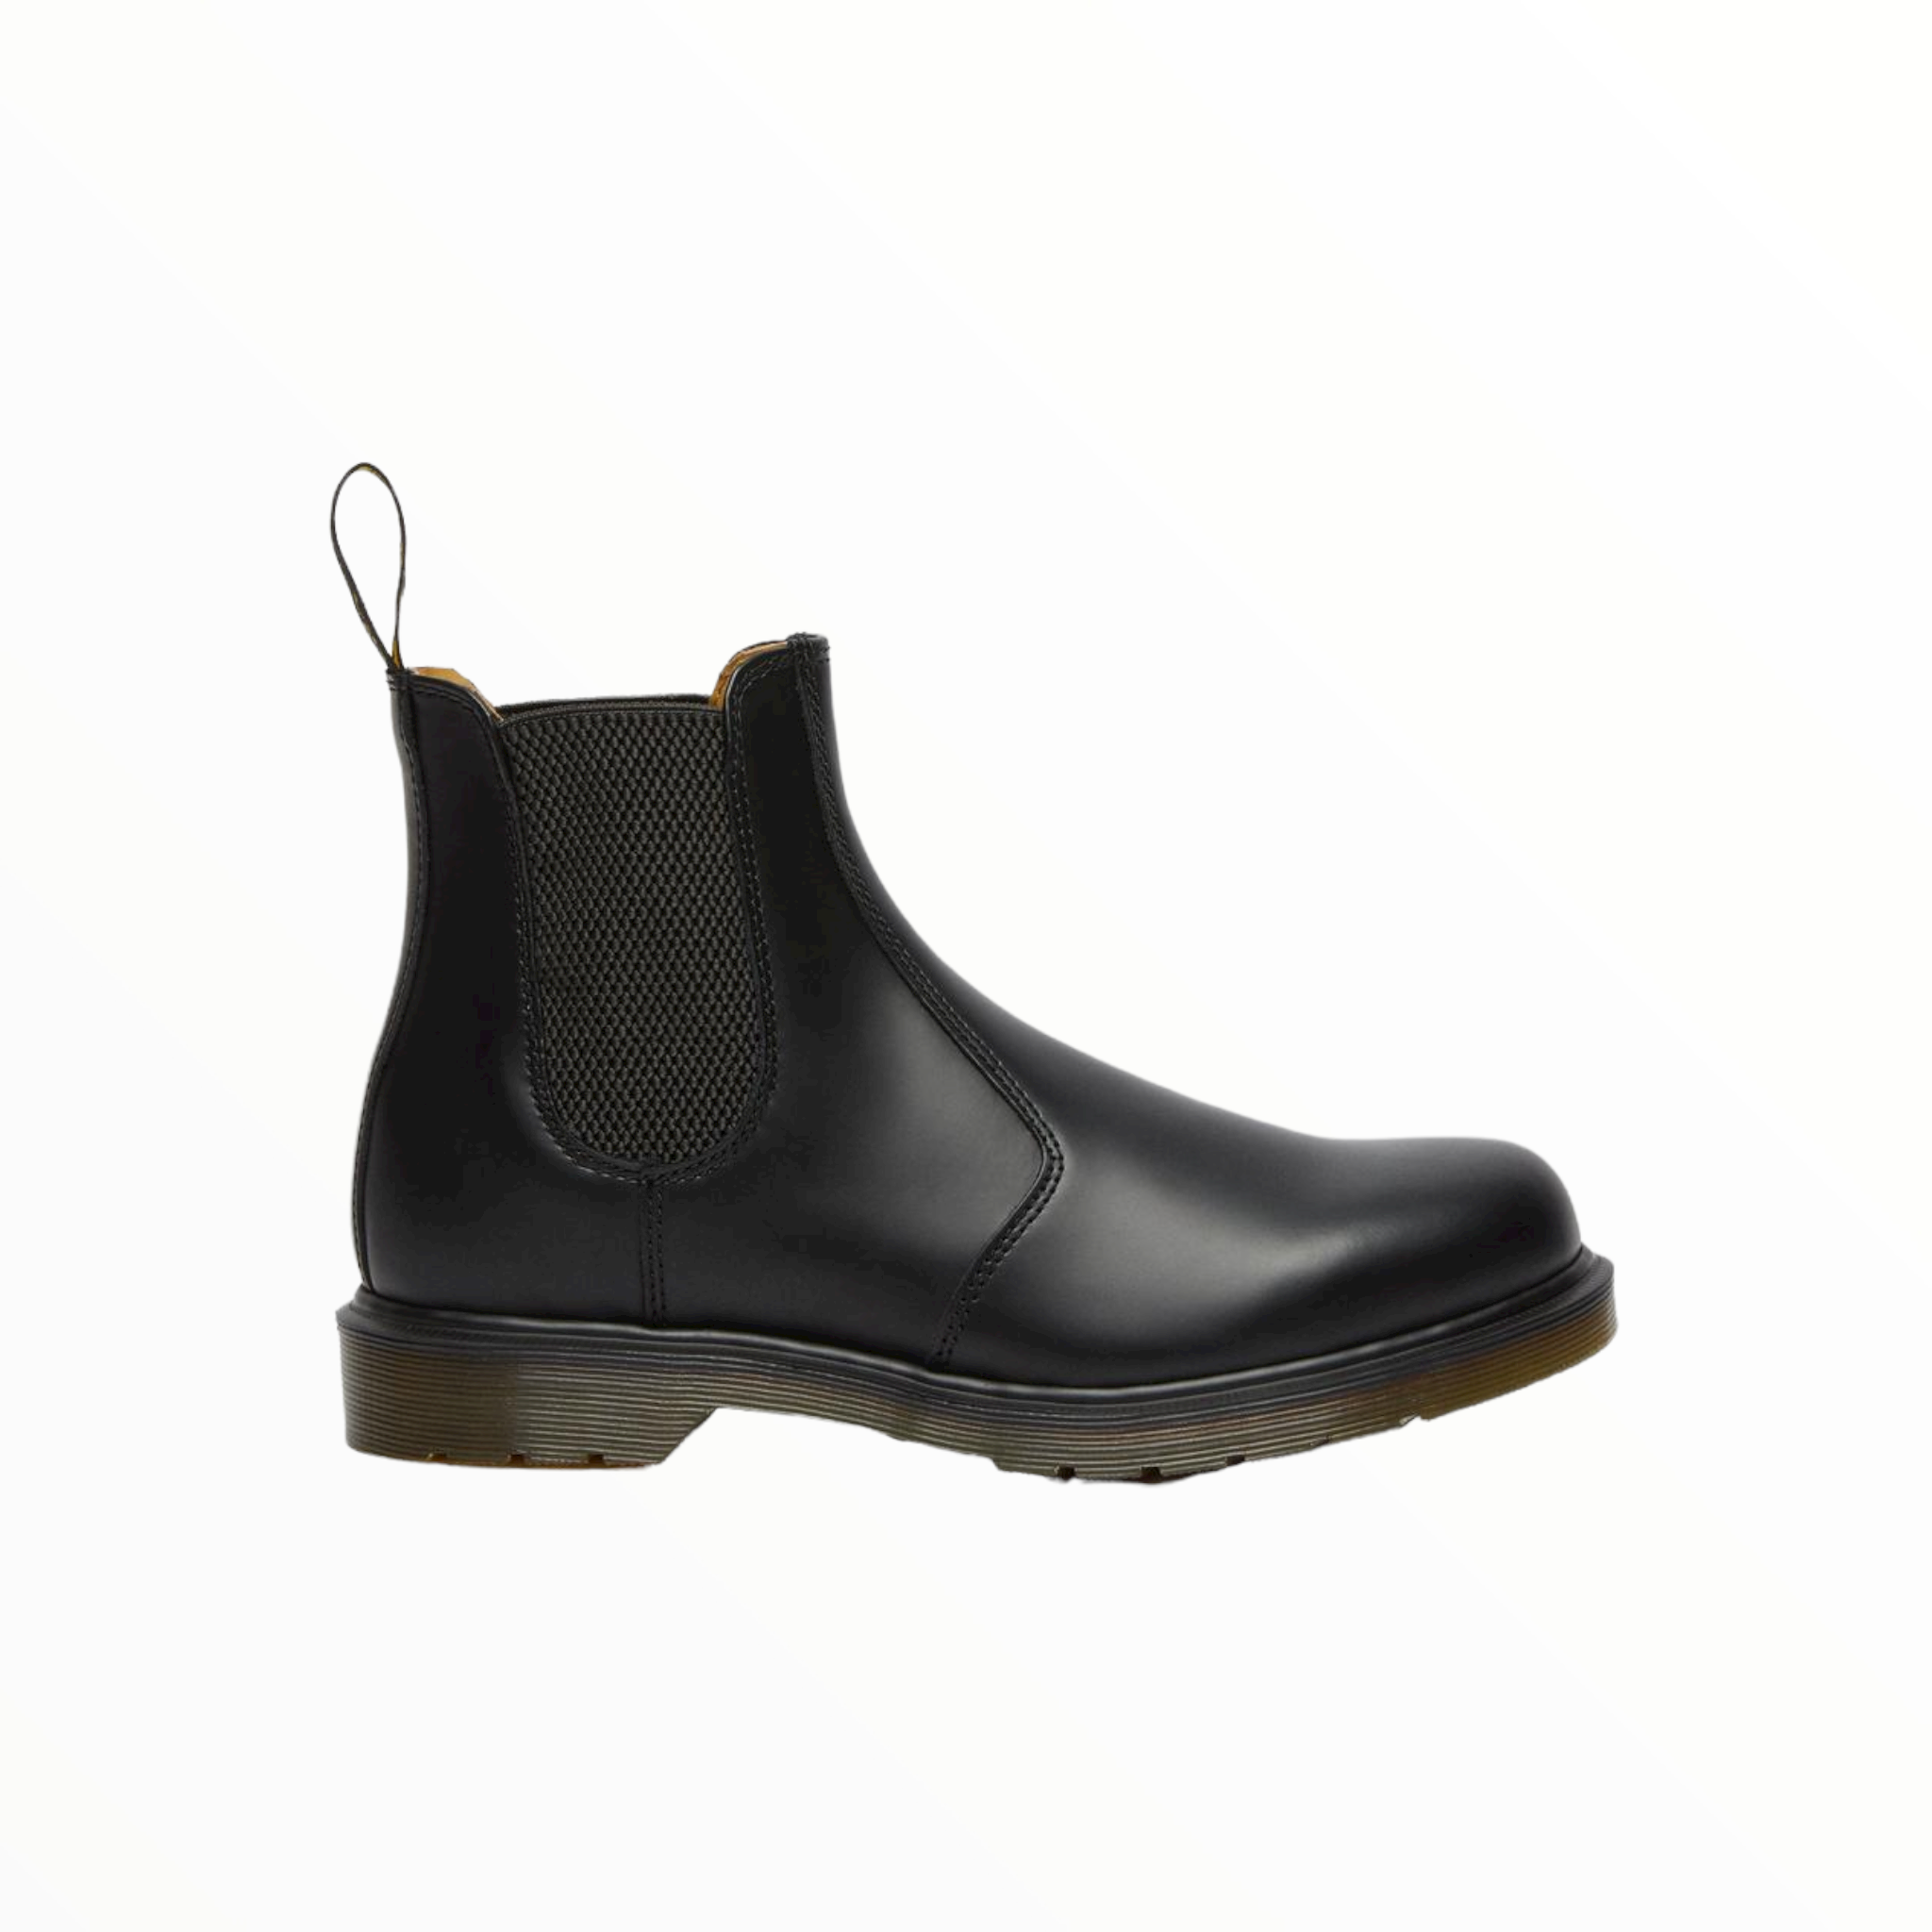 Shop 2976 Chelsea Dr Martens - with shoe&amp;me - from Dr. Martens - Boots - Boot, Mens, Winter, Womens - [collection]